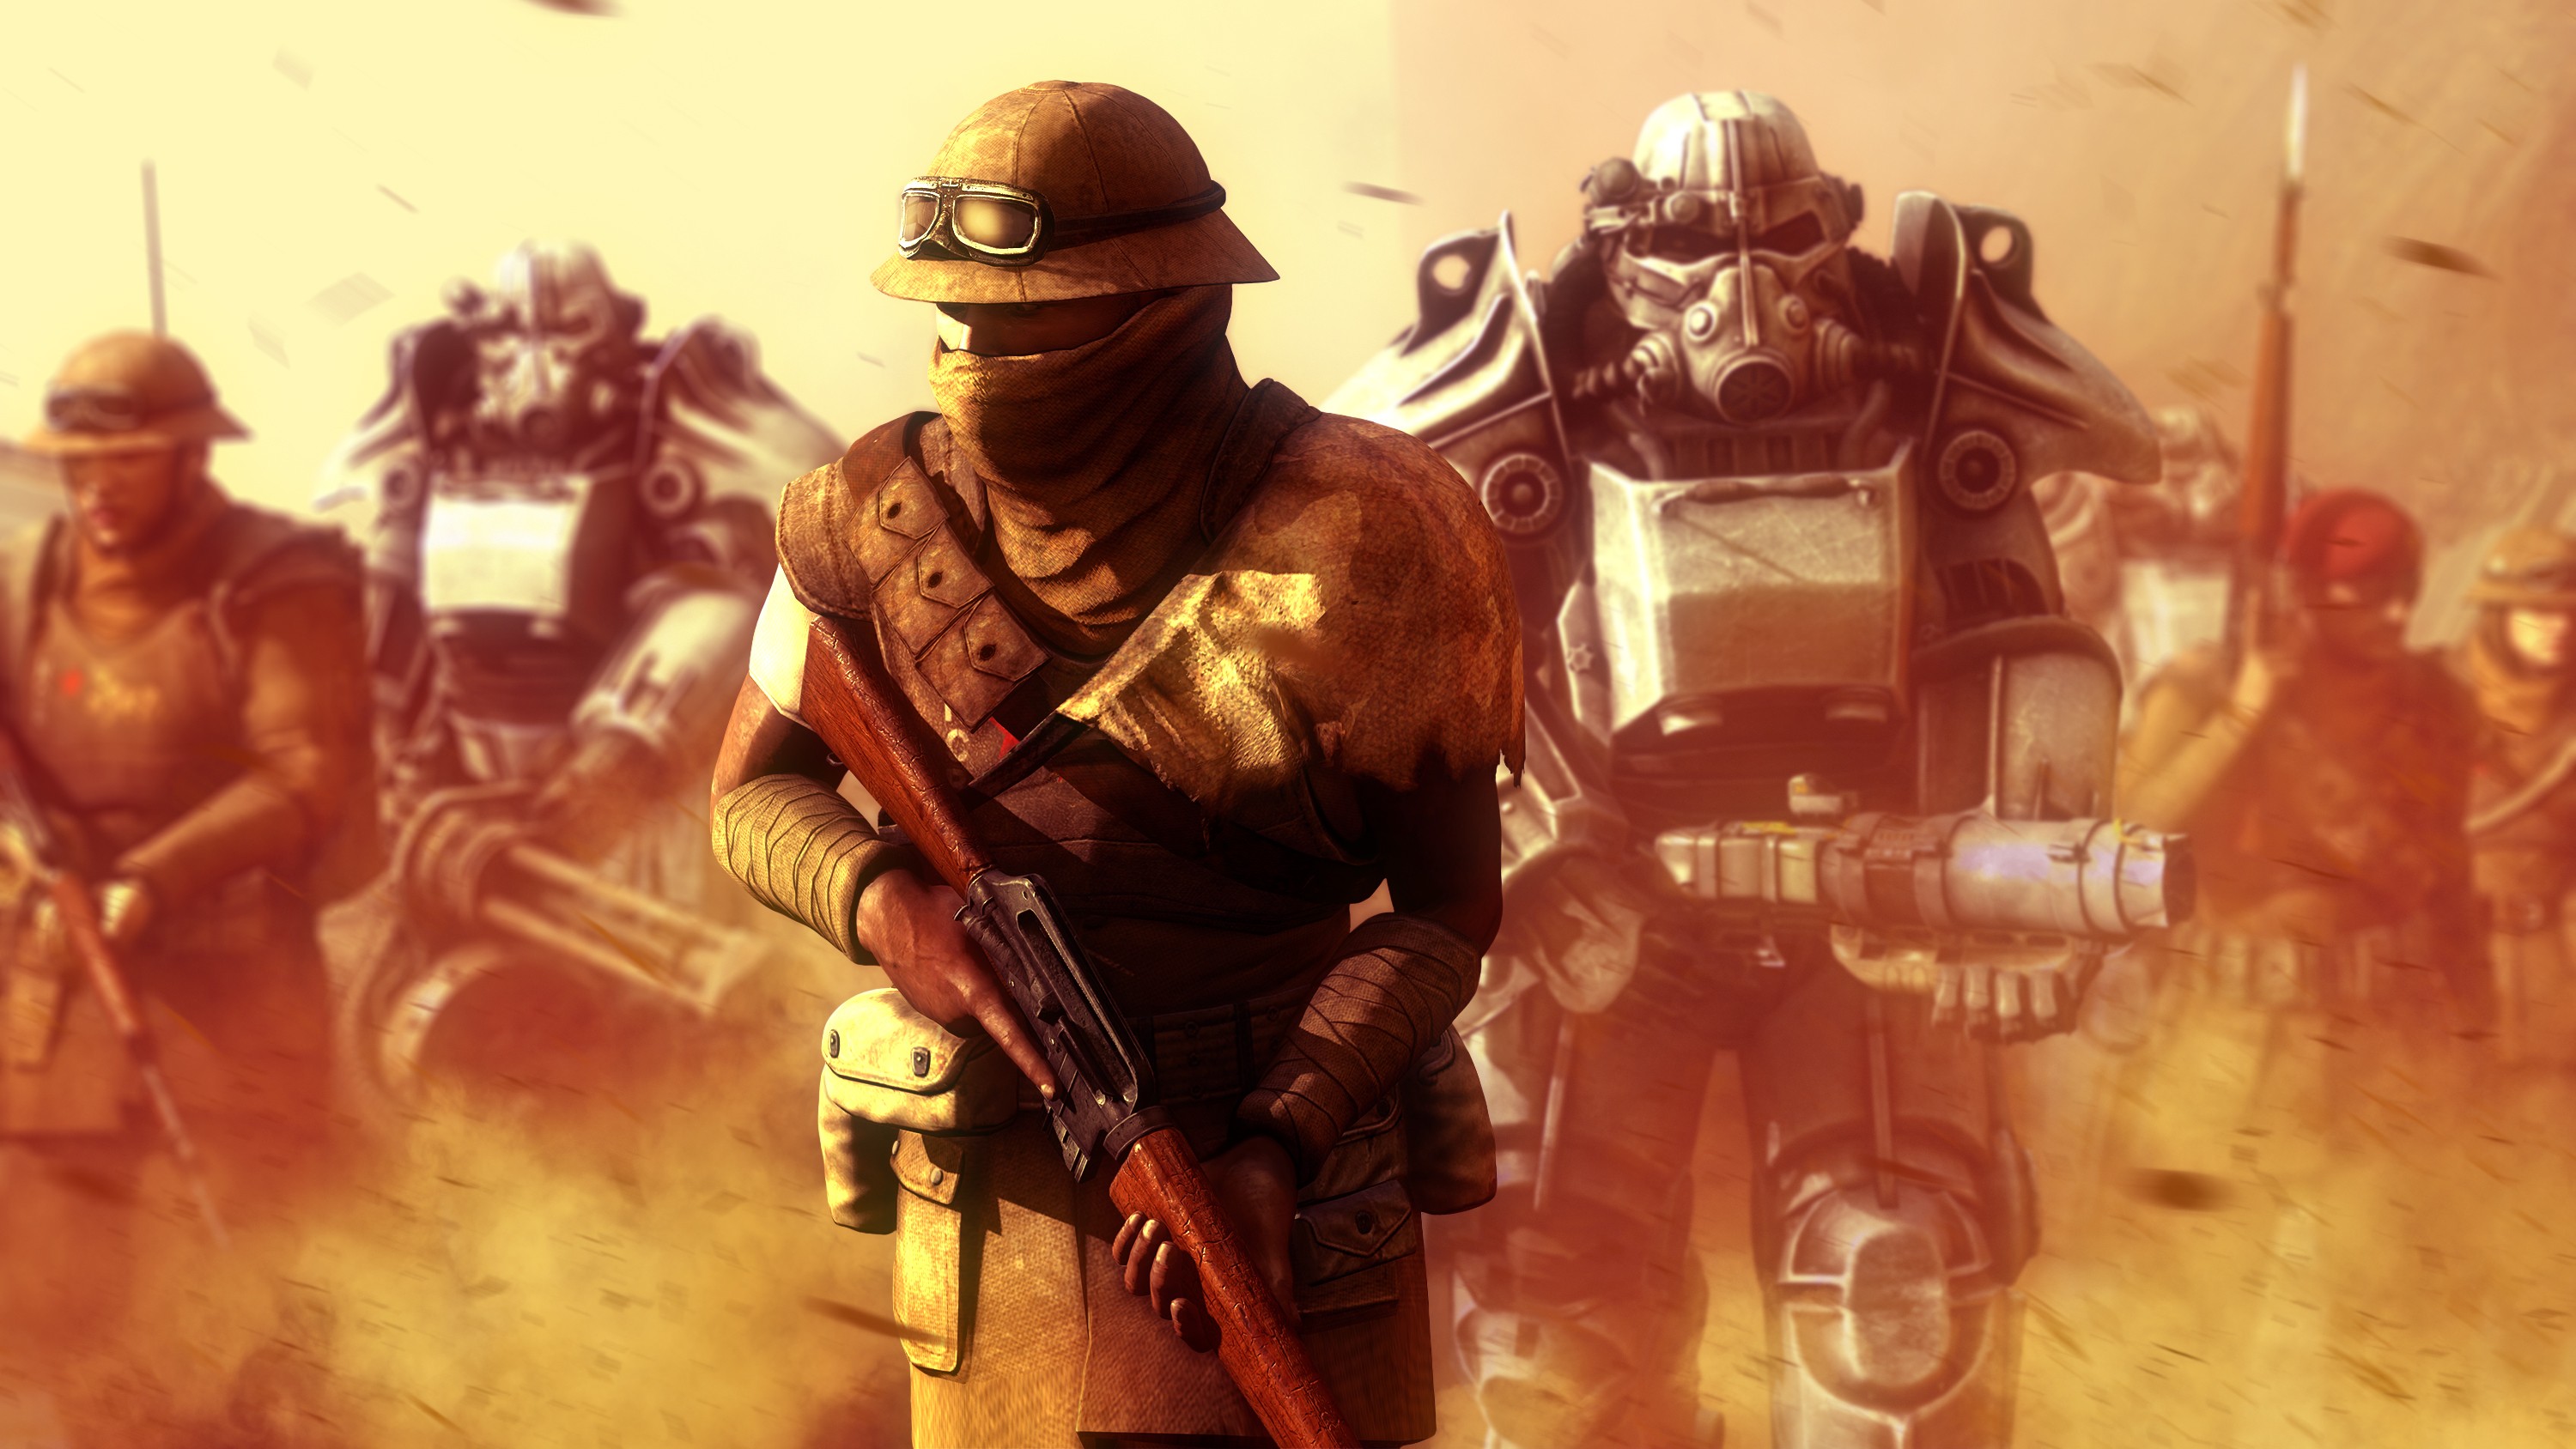 General 3000x1688 video games Fallout: New Vegas New California Republic power armor Fallout NCR obsidian PC gaming futuristic apocalyptic weapon video game art